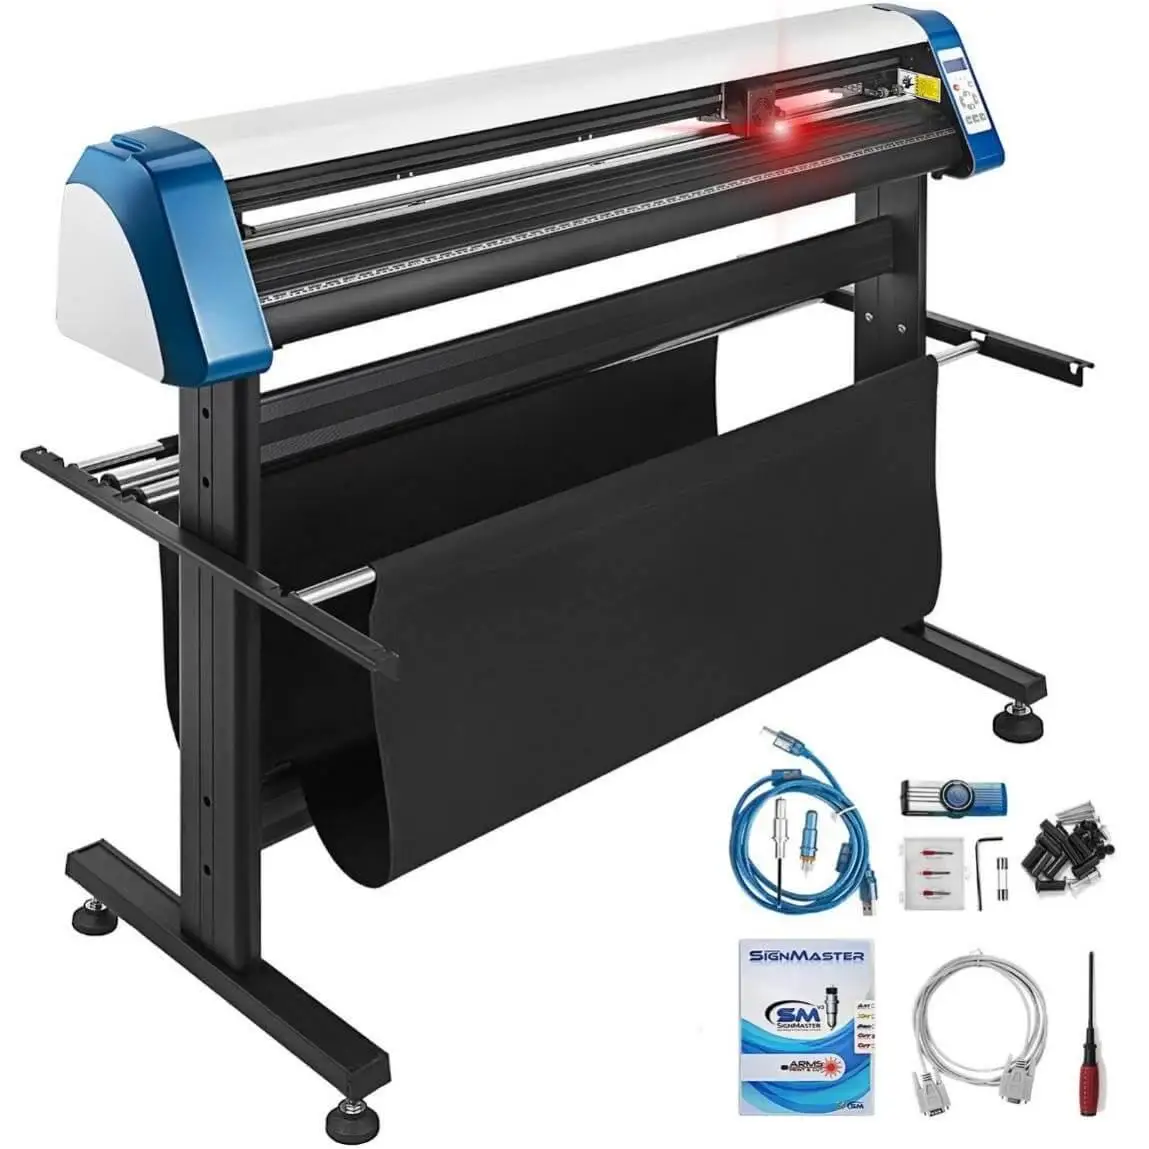 VEVOR 53-inch automatic vinyl cutter